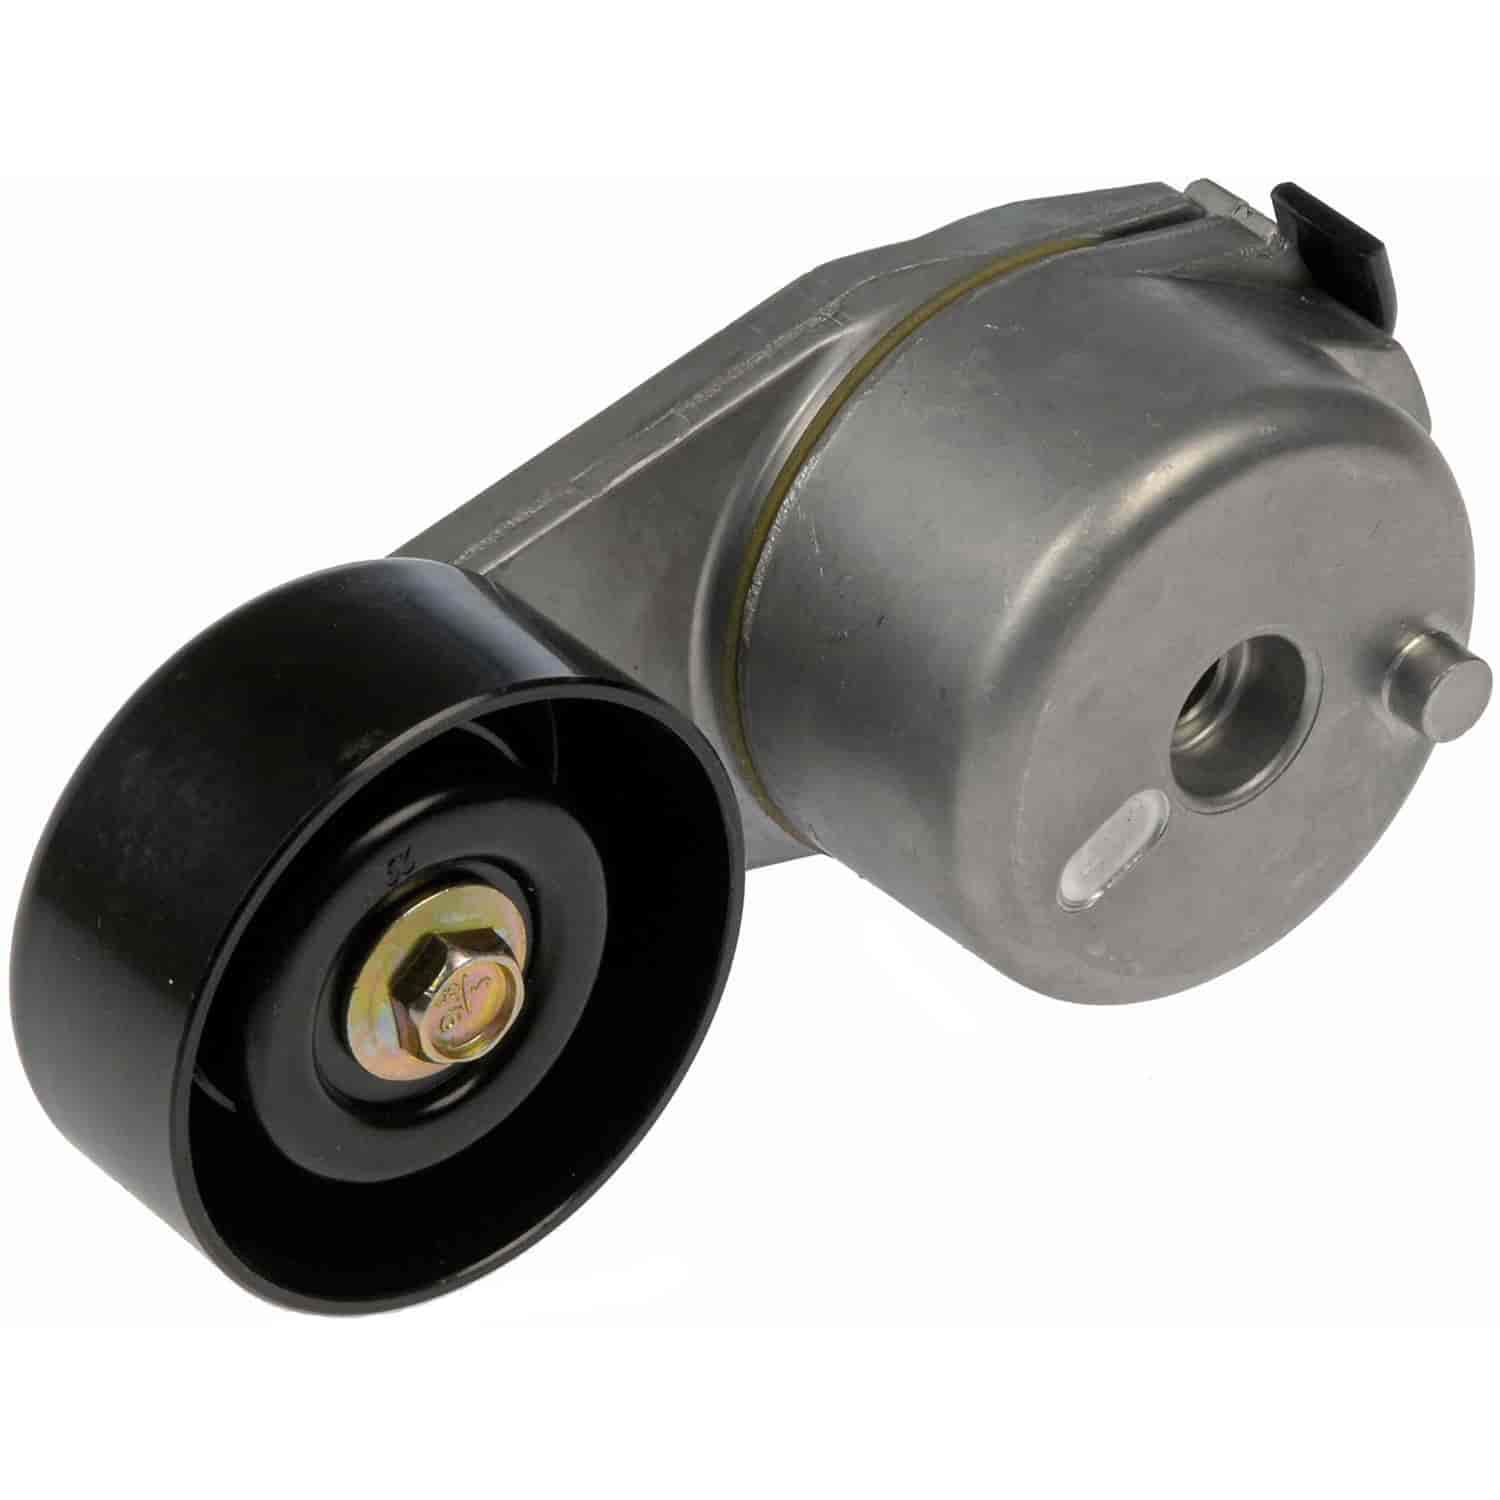 Automatic Belt Tensioner 2004-2007 Buick, 2002-2012 Chevy/GMC, 2006-2010 Hummer, 2002-2004 Oldsmobile, 2005-2009 Saab